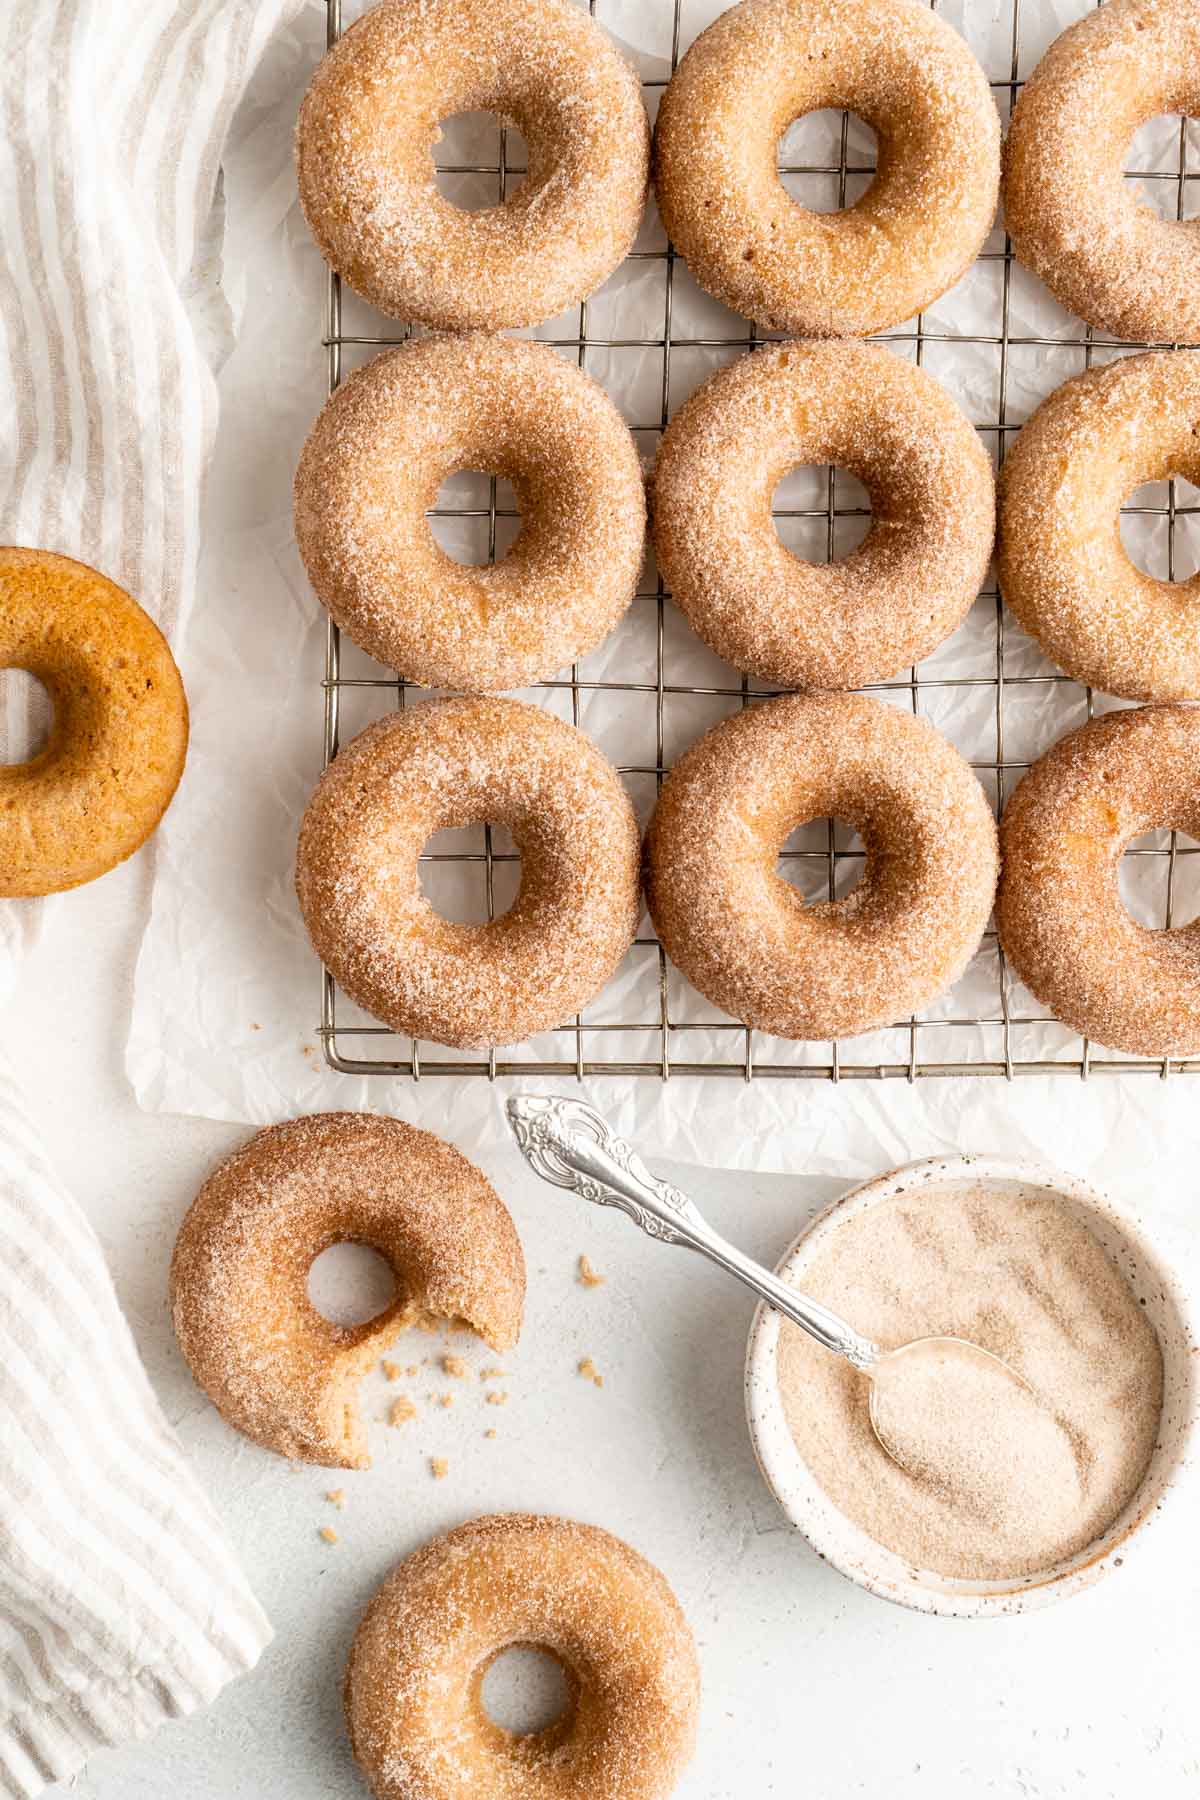 Donuts with cinnamon sugar coating on a wire cooling rack.